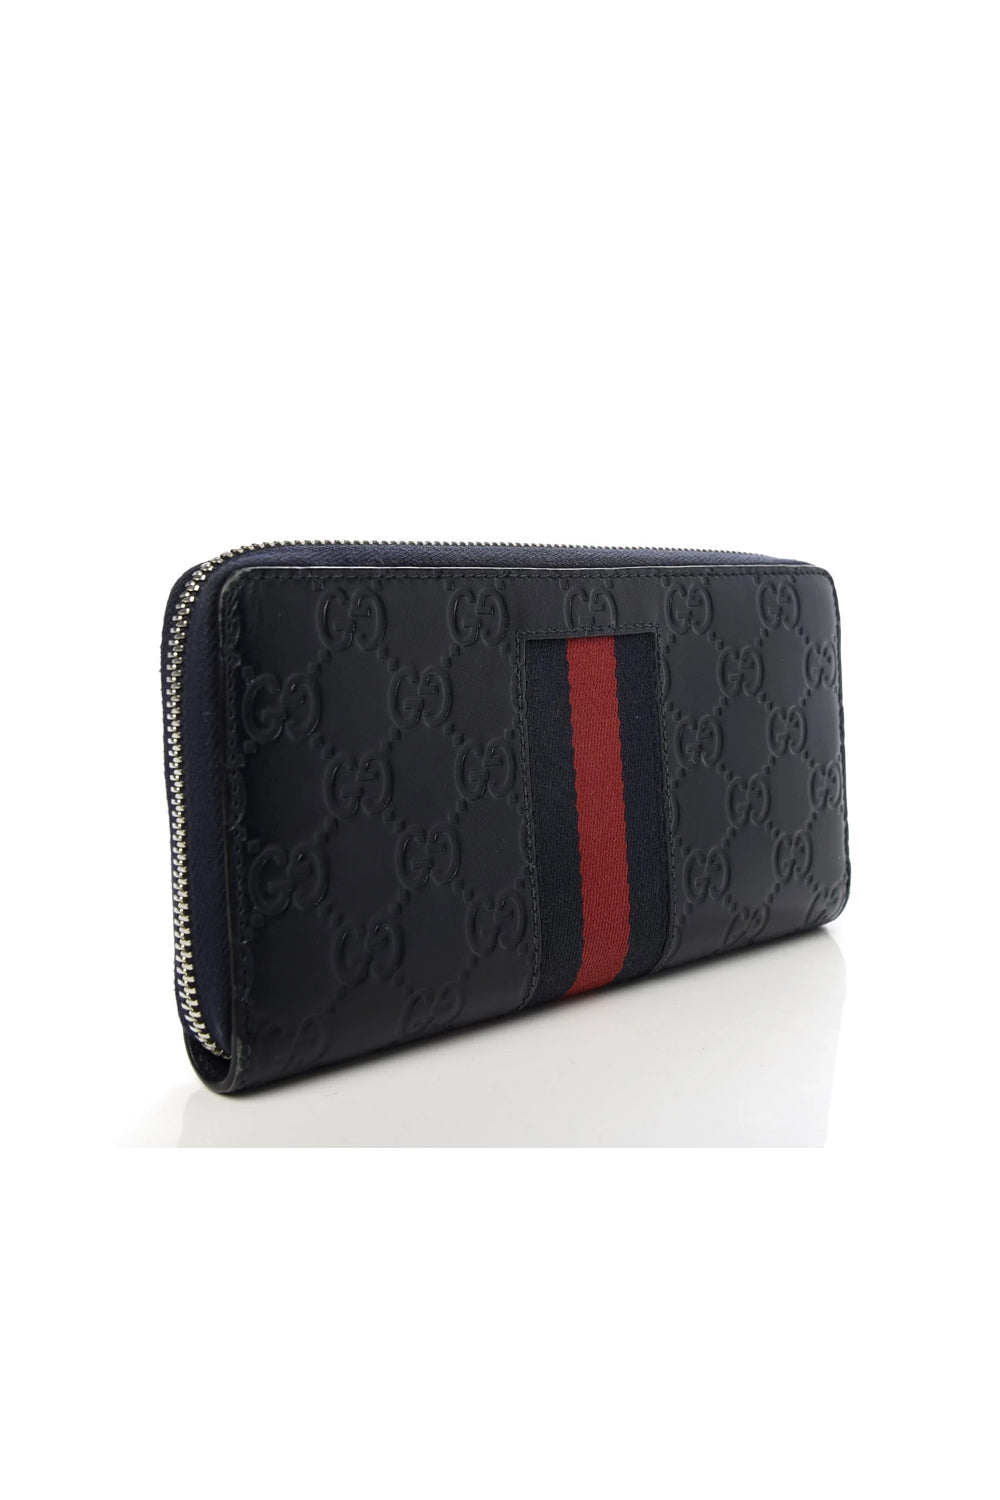 New Gucci Navy Blue Leather Guccissima Web Stripe Long Zip Wallet 408831 